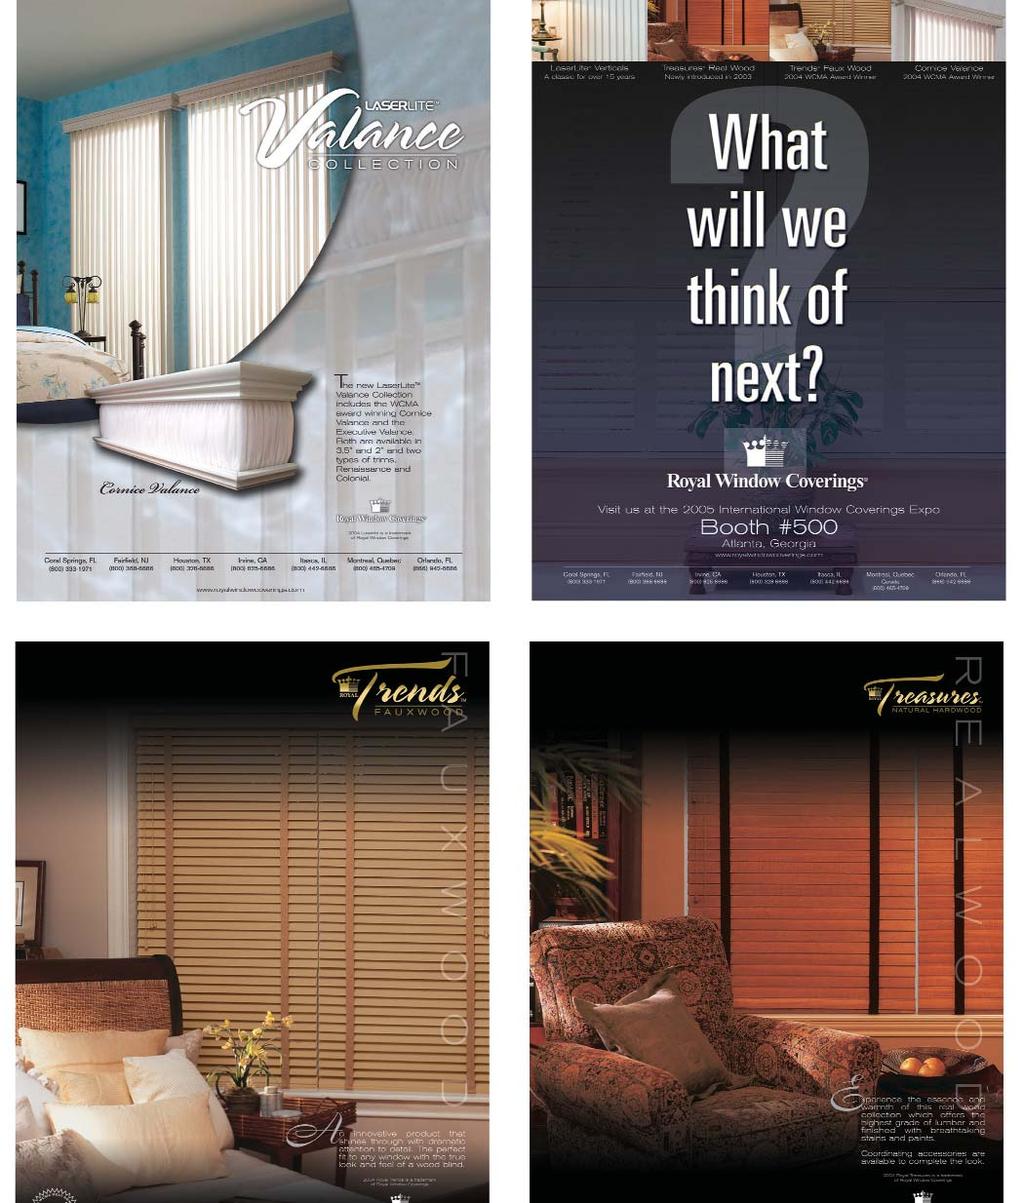 Royal Window Coverings ADVERTISMENTS Product Category: Merchandising Royal Window Coverings print advertising campaign has reached a level it has never been at before by advertising more frequently